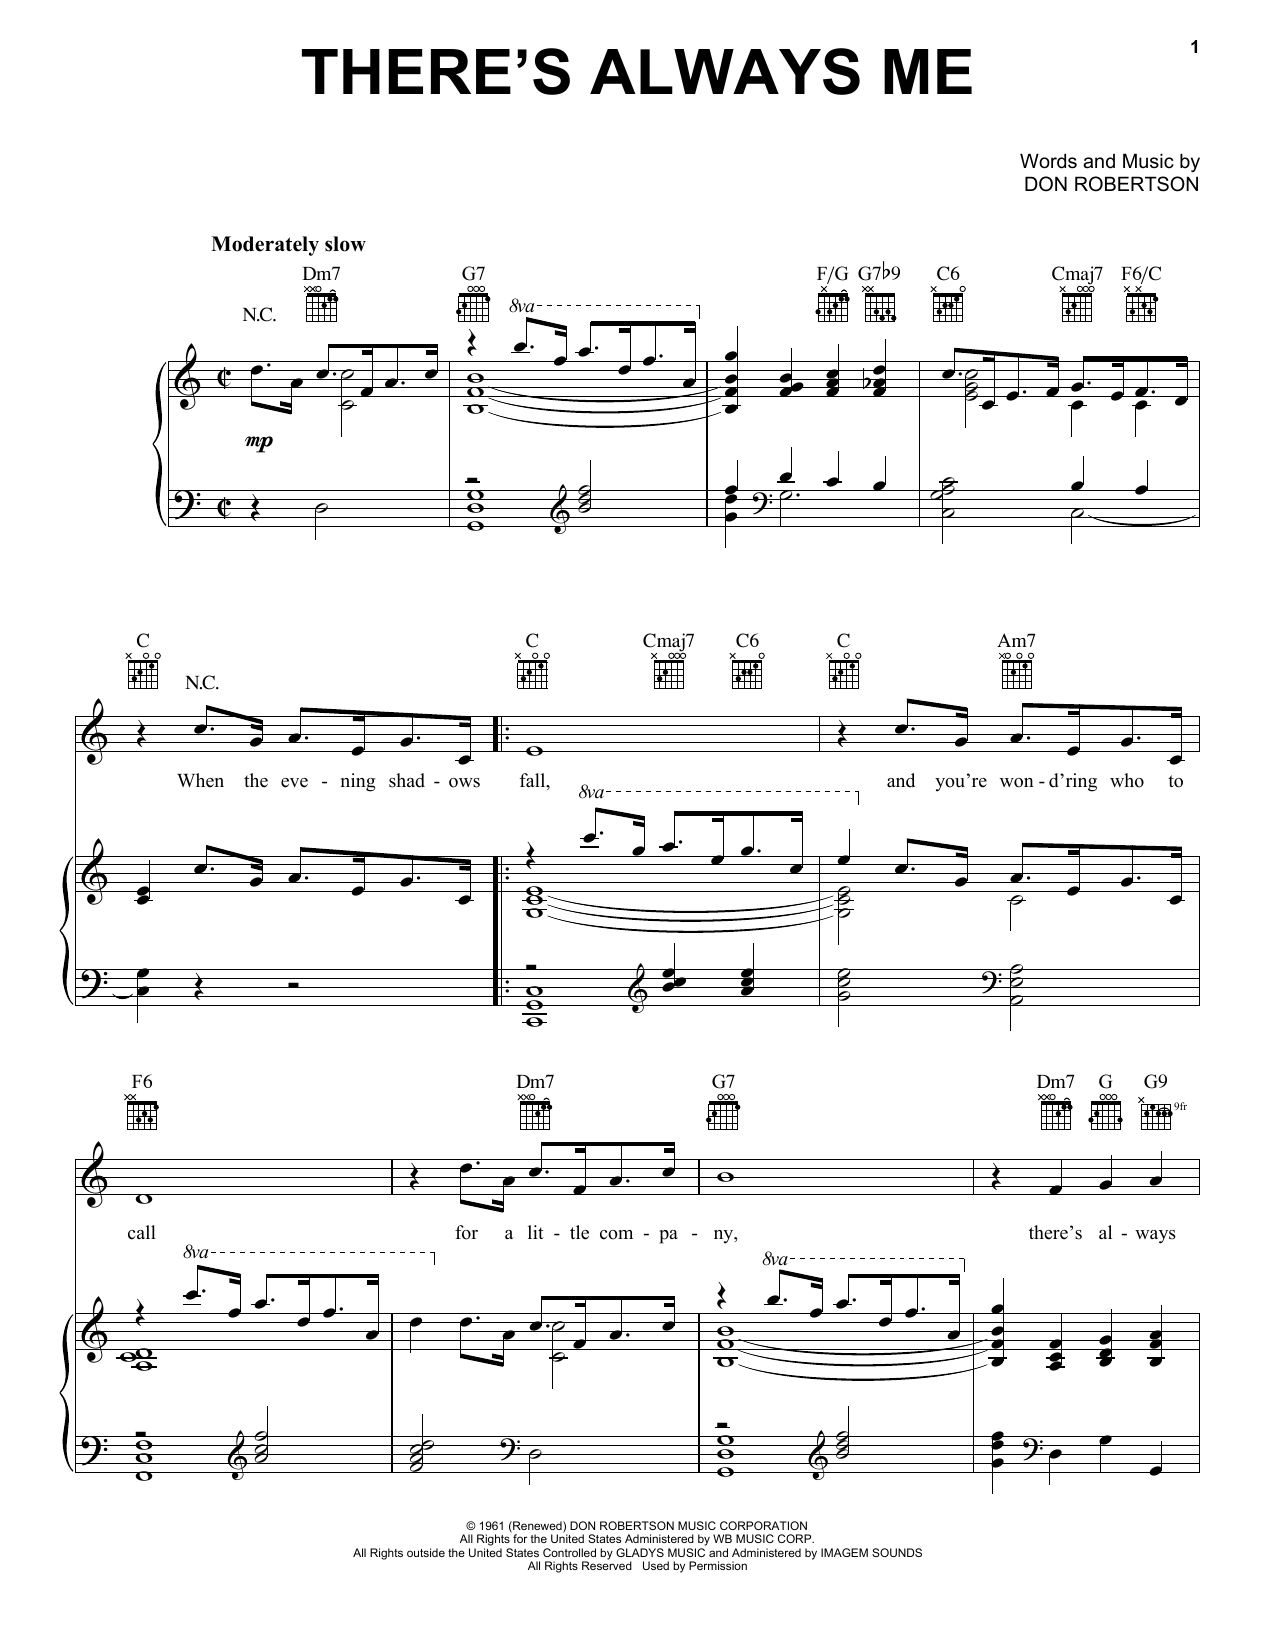 Download Elvis Presley There's Always Me Sheet Music